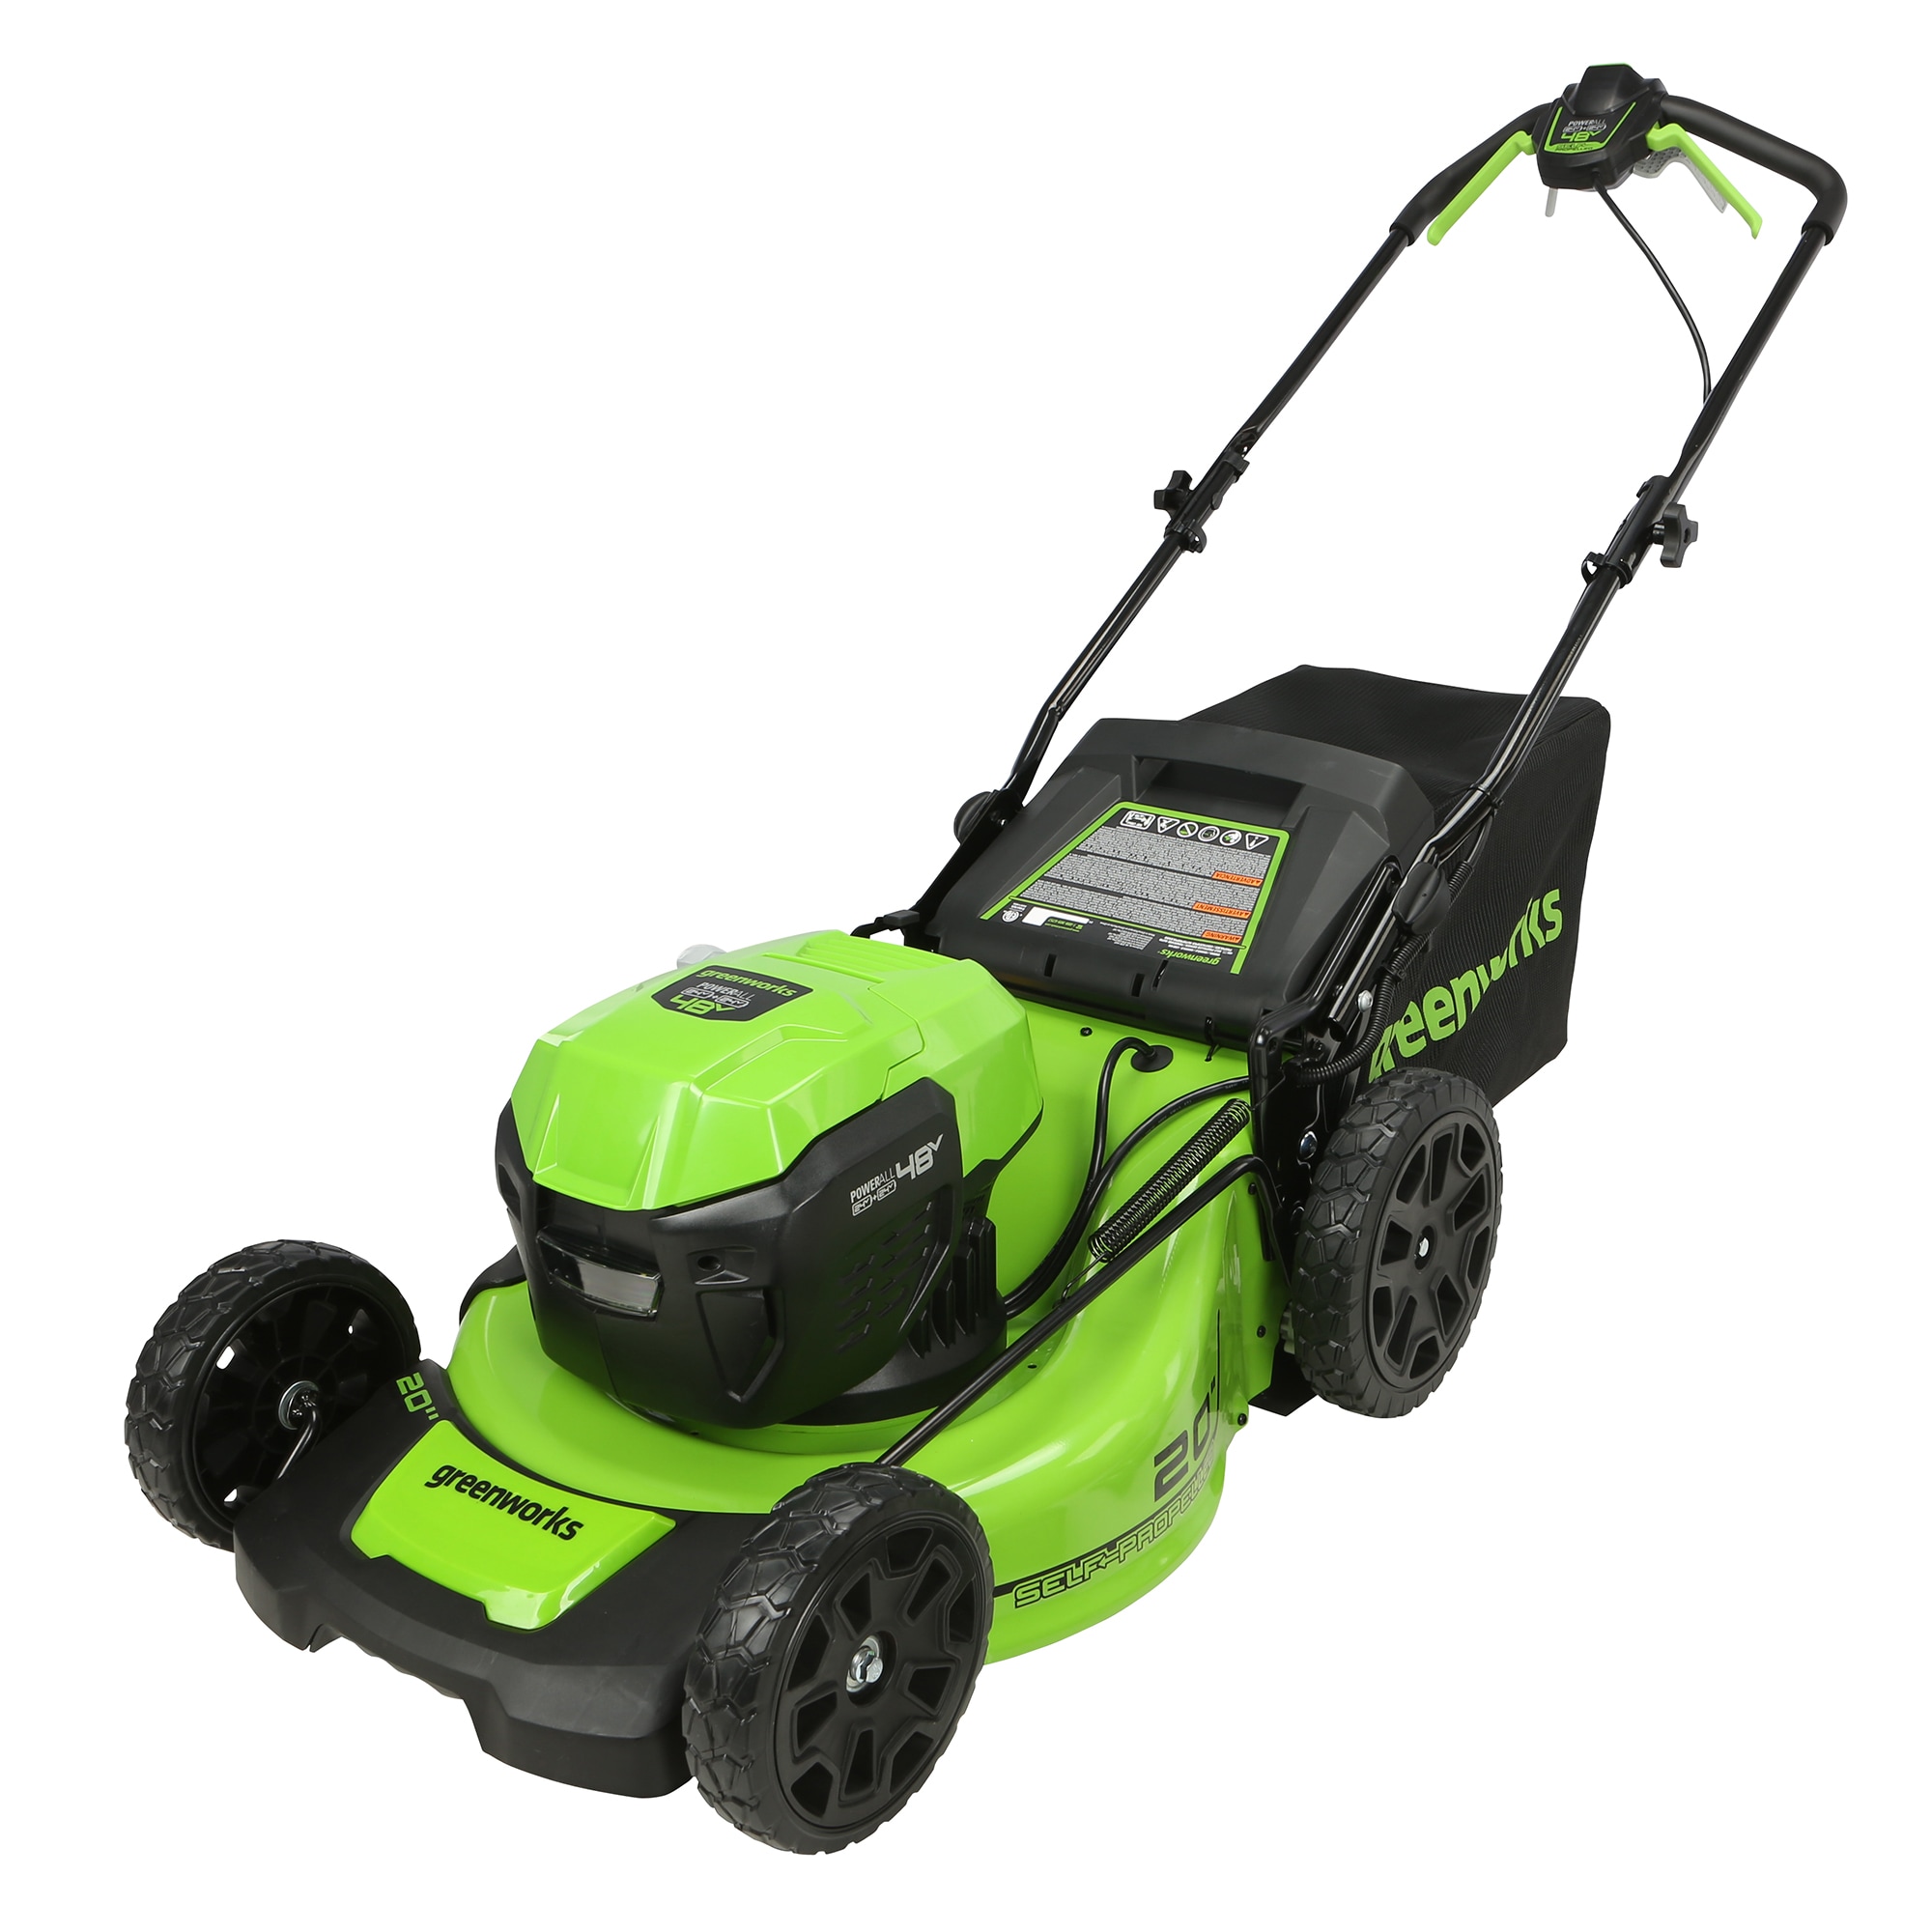 Greenworks 24V 2Ah Powerall String Trimmer & Blower Combo with USB Battery & Slow Charger Outdoor Power Tool Set